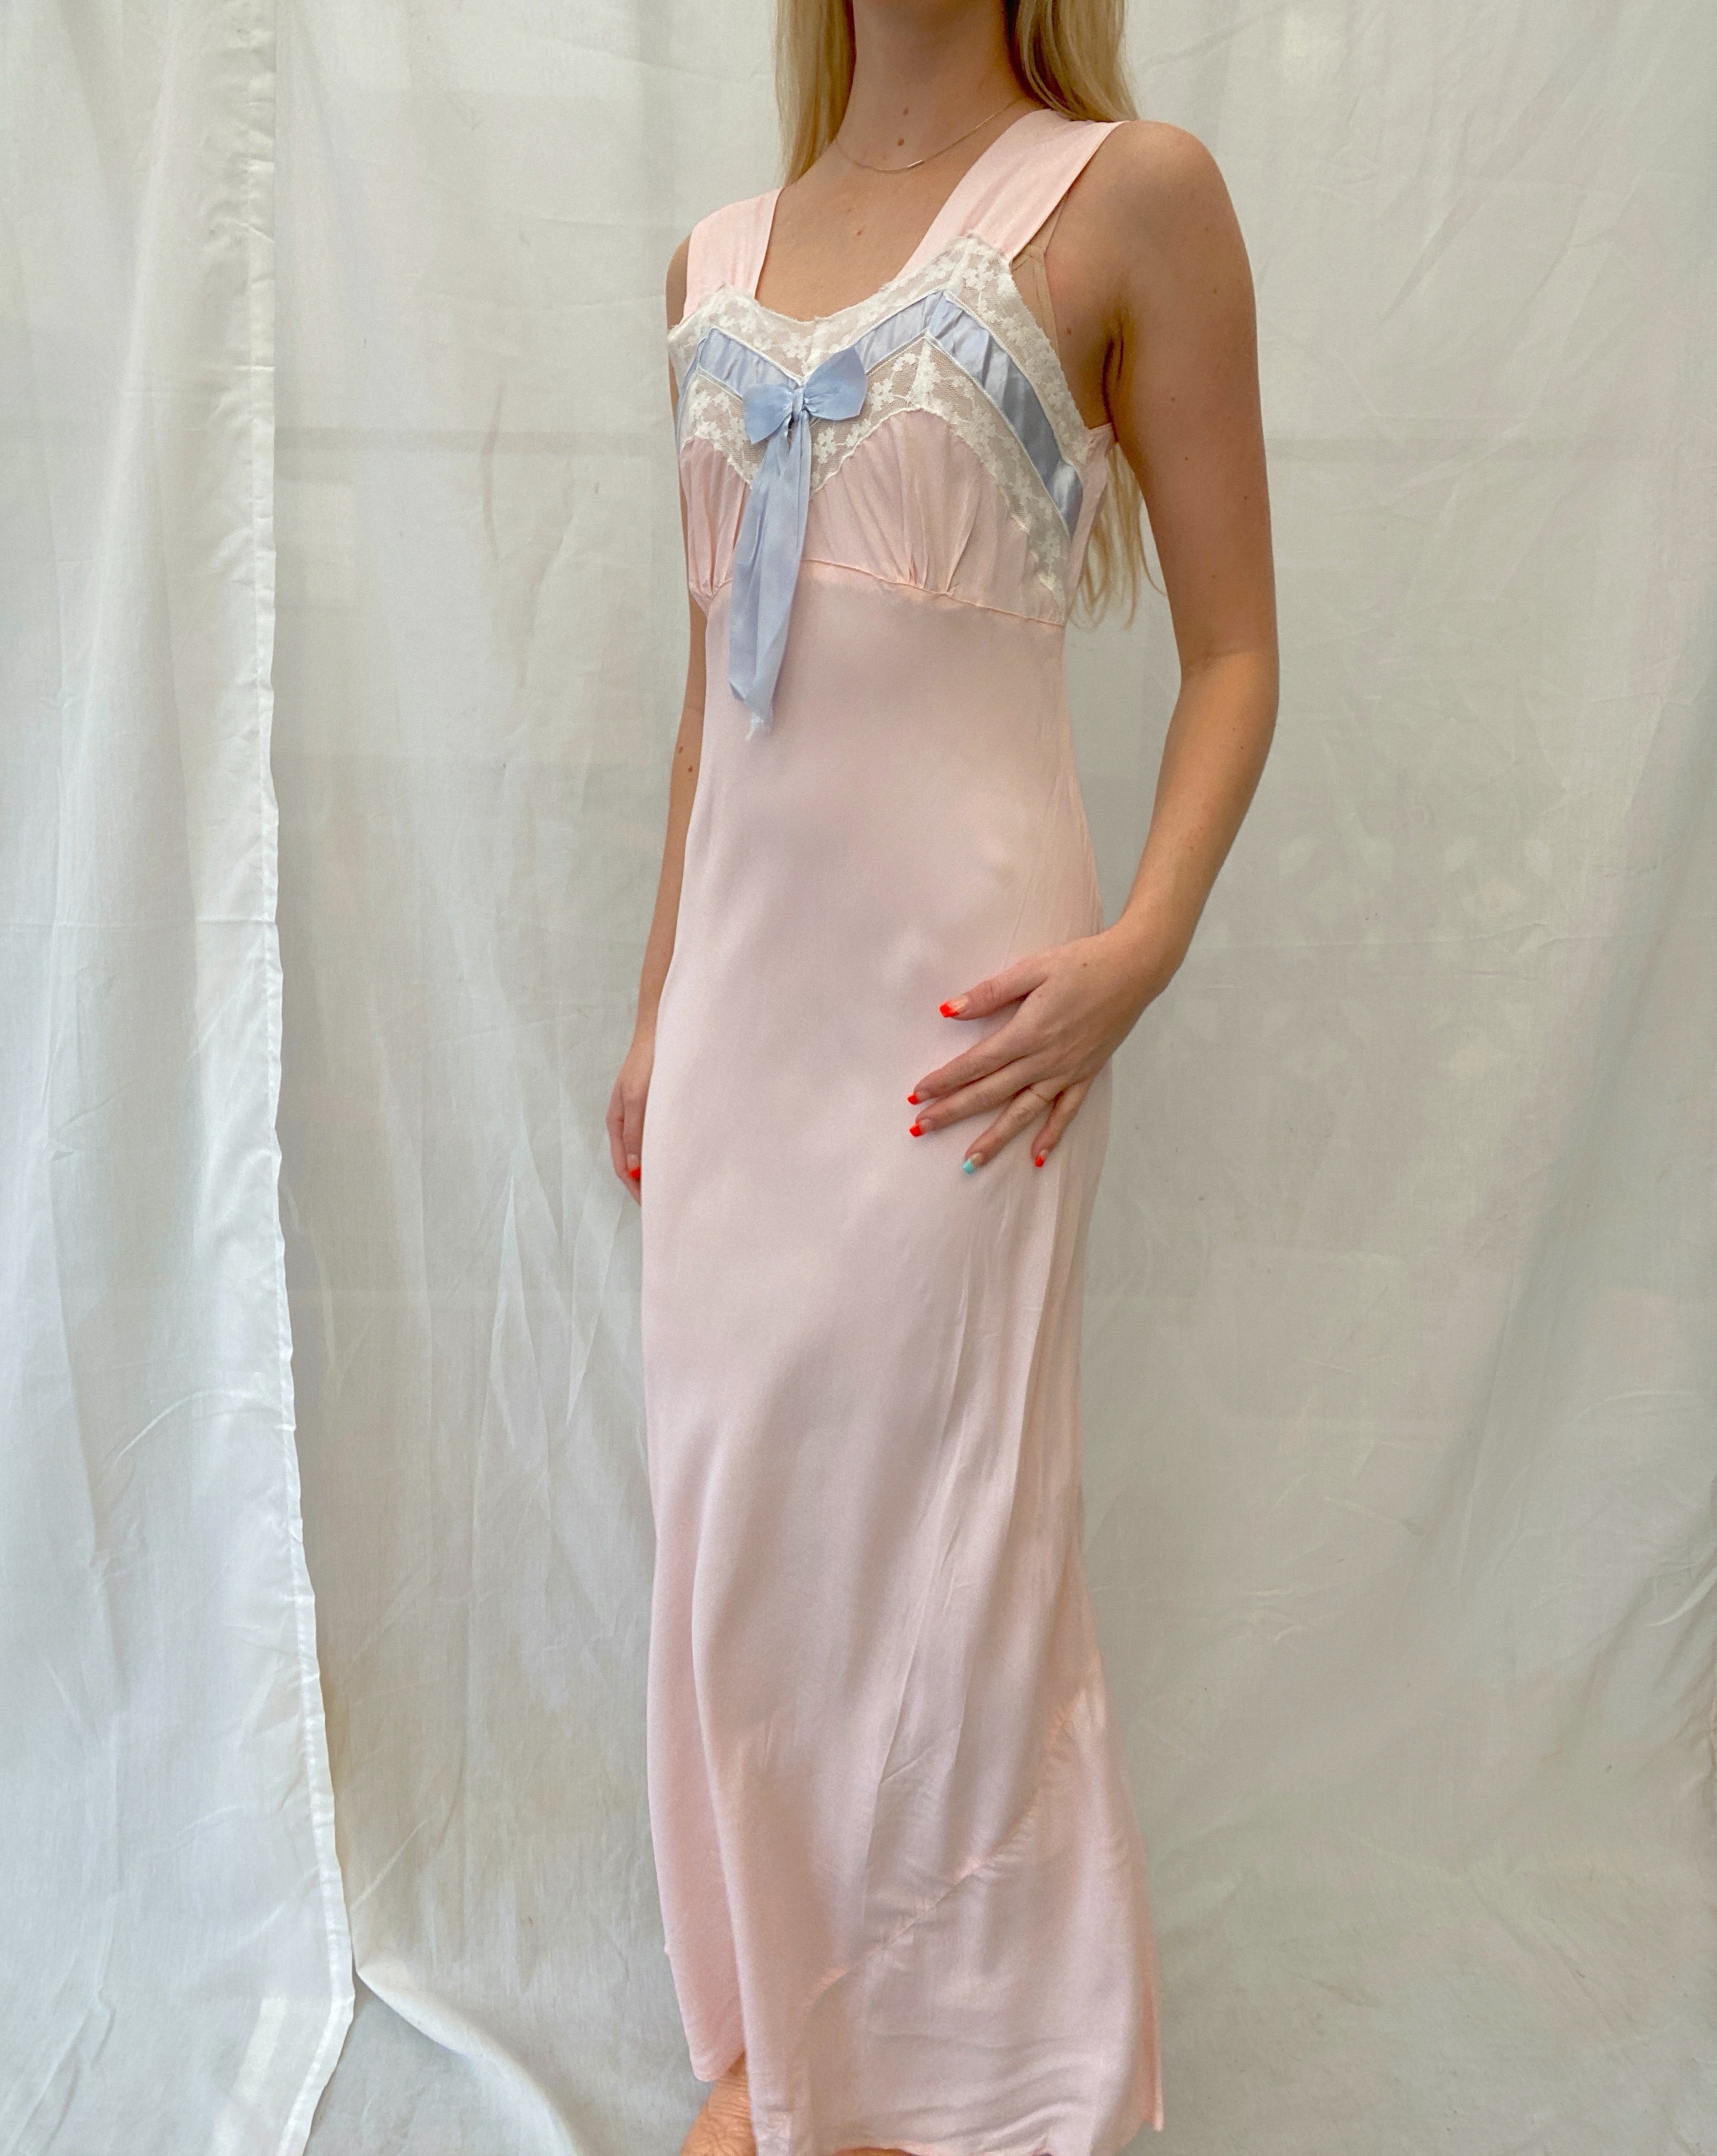 1940's Pink Slip with Blue Bow and White Lace